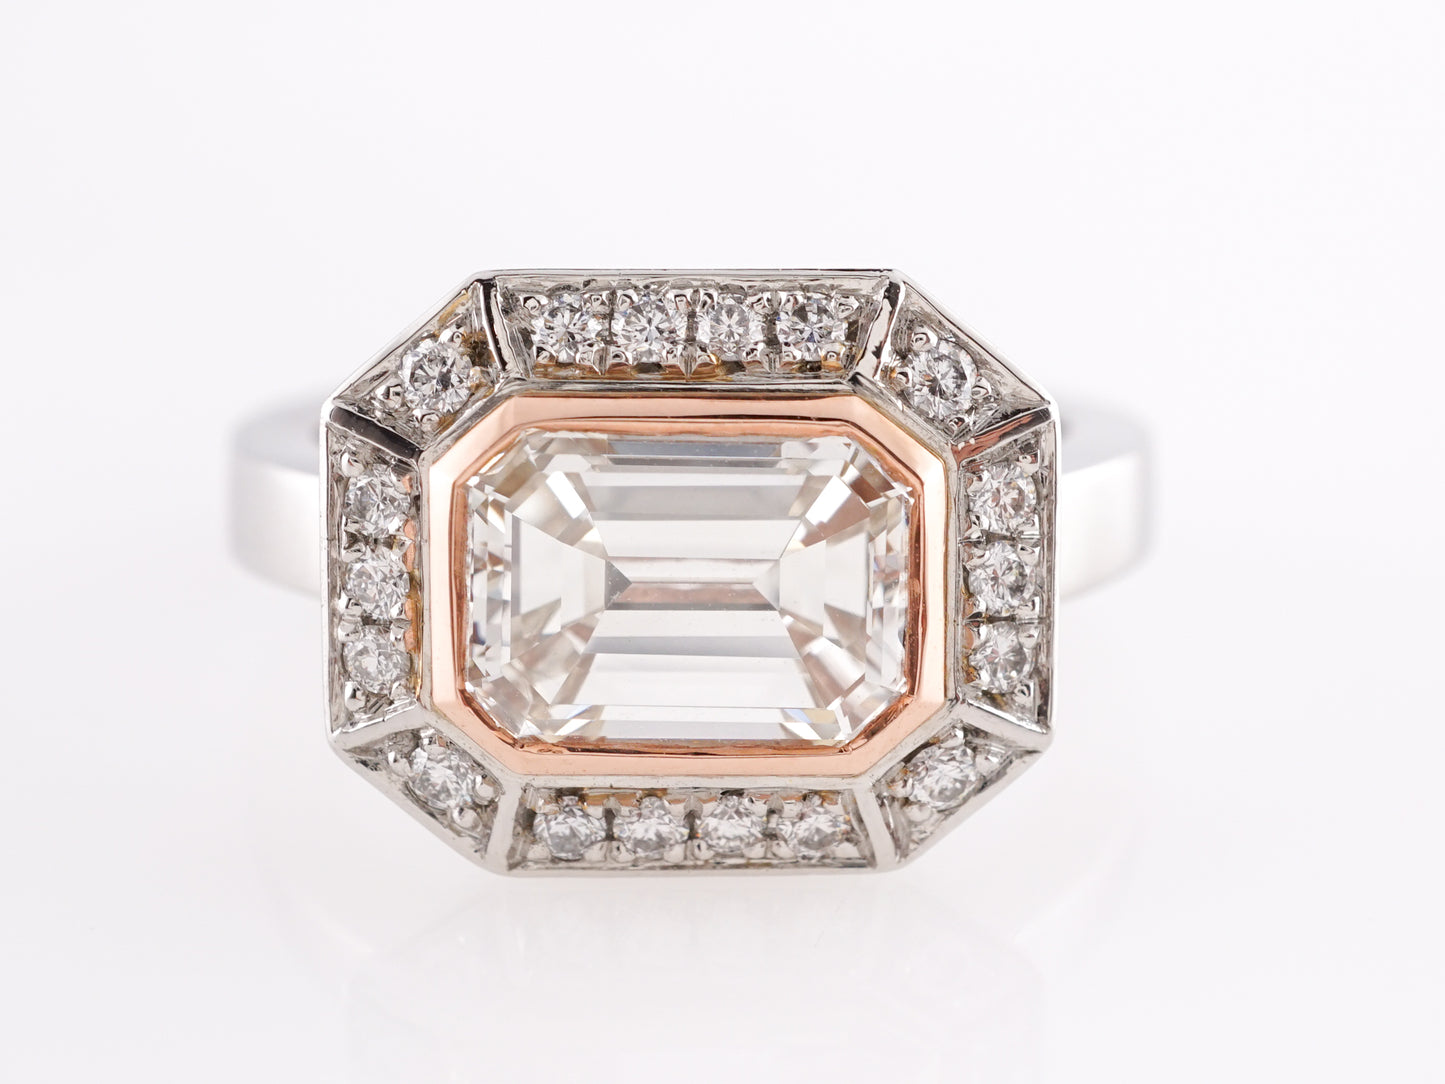 Emerald Cut Diamond Engagement Ring in Platinum and Rose Gold